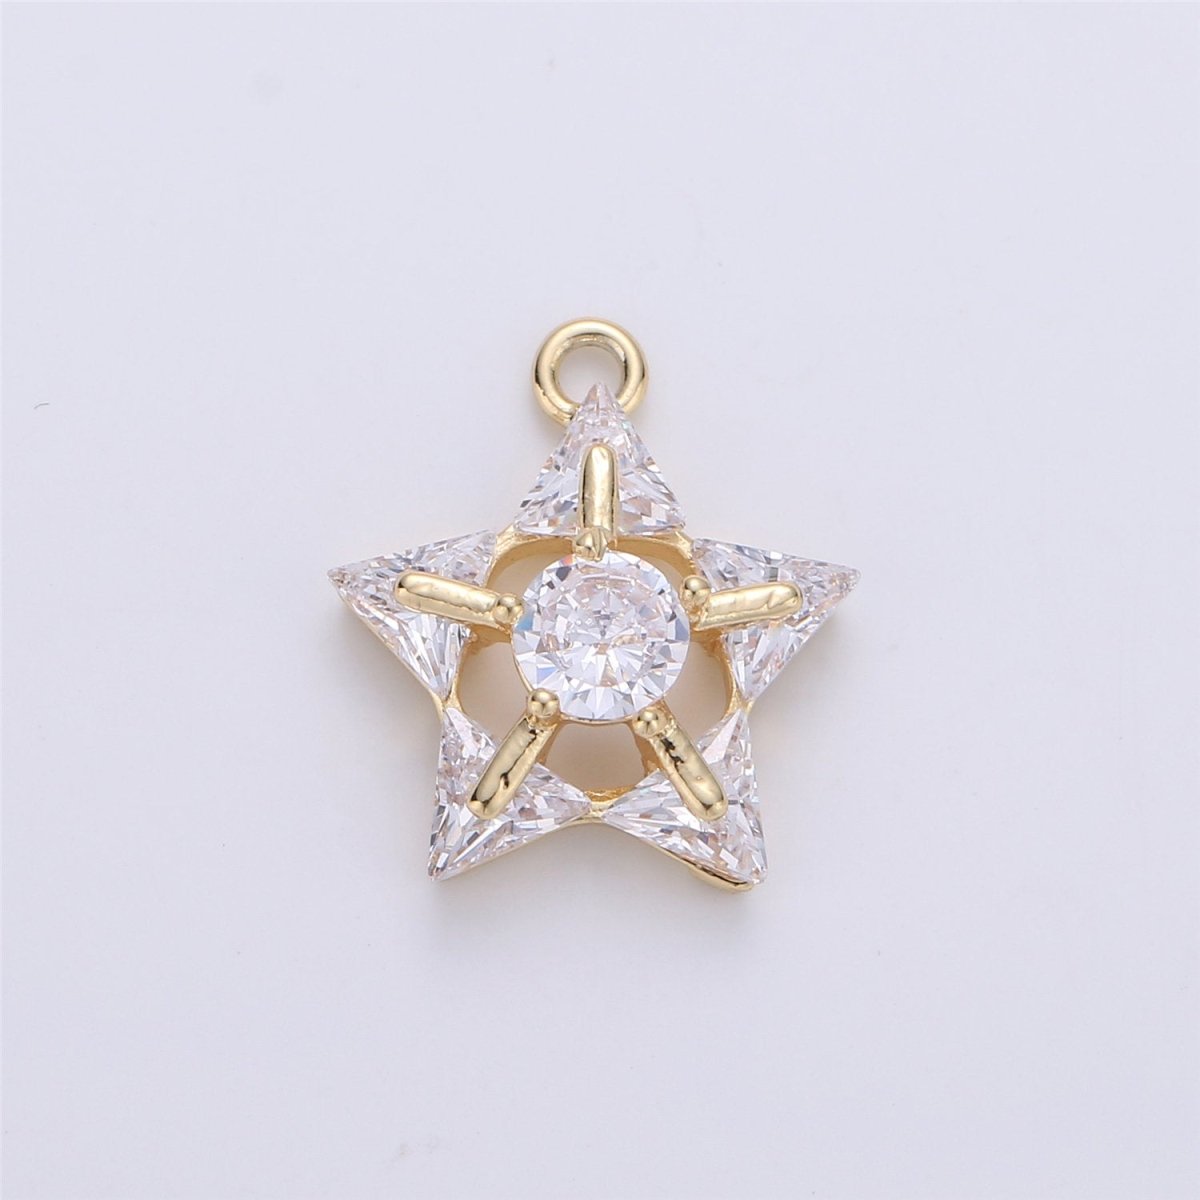 14k Gold filled Star Charms, Dainty Solitaire CZ Star Pendant for Necklace Bracelet Earring Jewelry Making Supply 16x14mm E-499 - DLUXCA